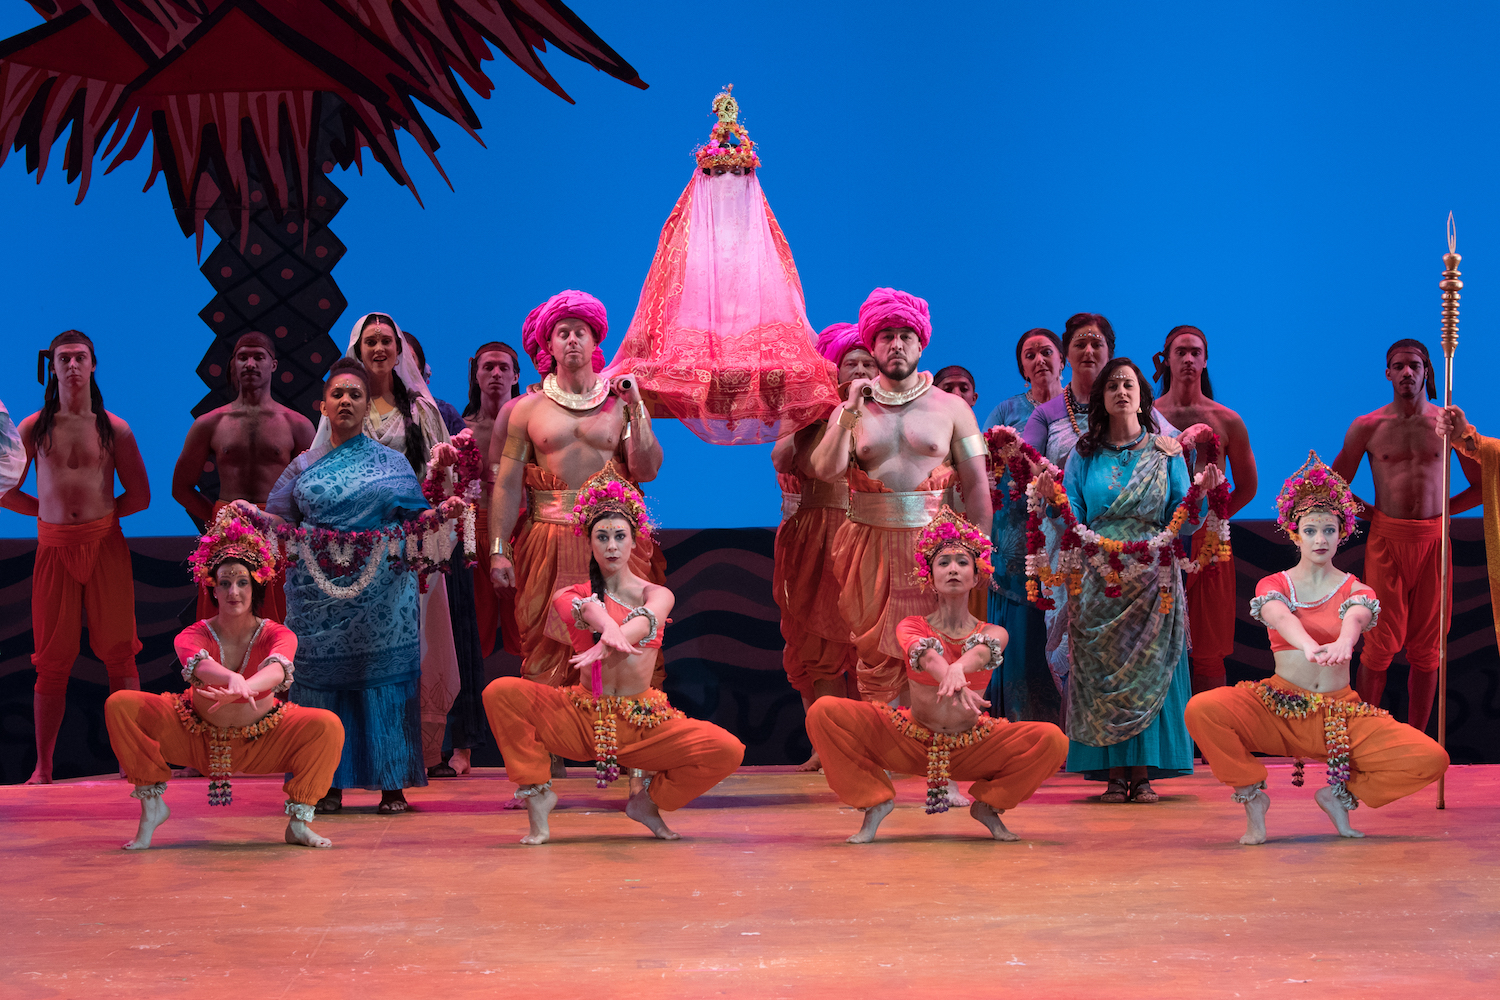 REVIEW: Visually appealing ‘Pearl Fishers’ entertains by embracing the opera’s conundrums